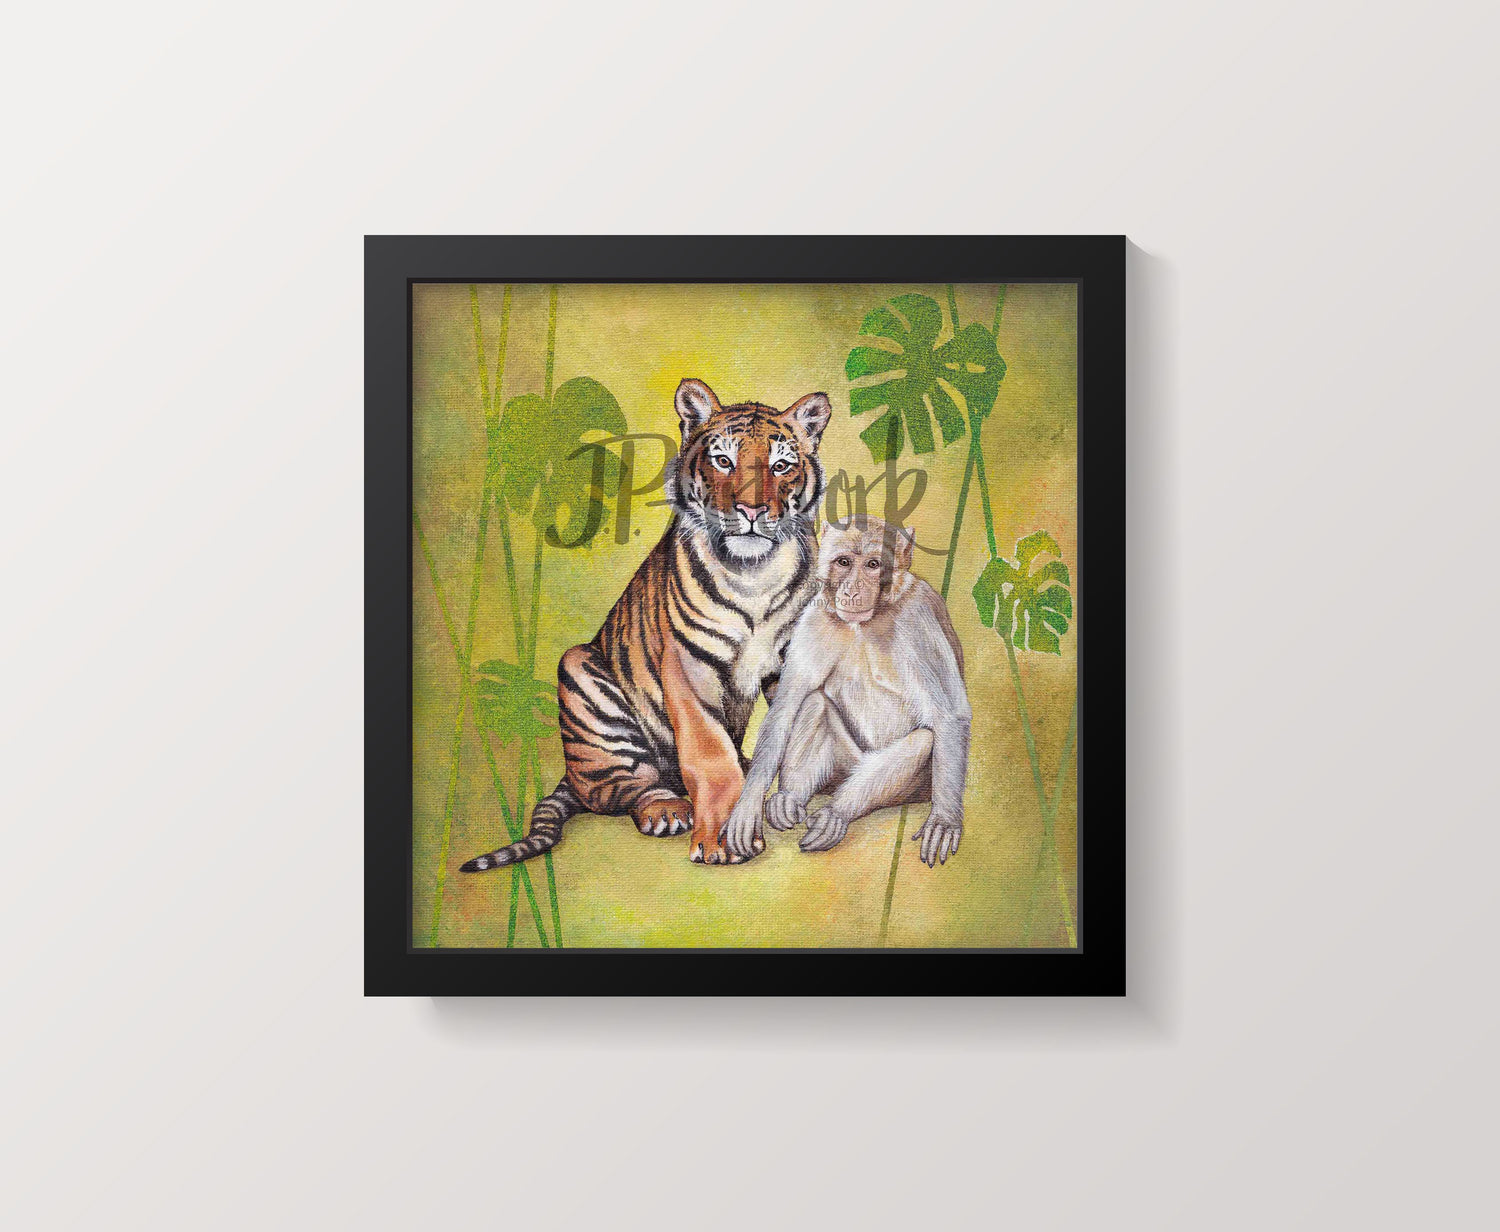 Tiger and Monkey art print; image shows shows them on a green background with monstera leaves, mocked up in a square wooden frame. Artwork is taken from an original acrylic painting by Jenny Pond, JP Artwork